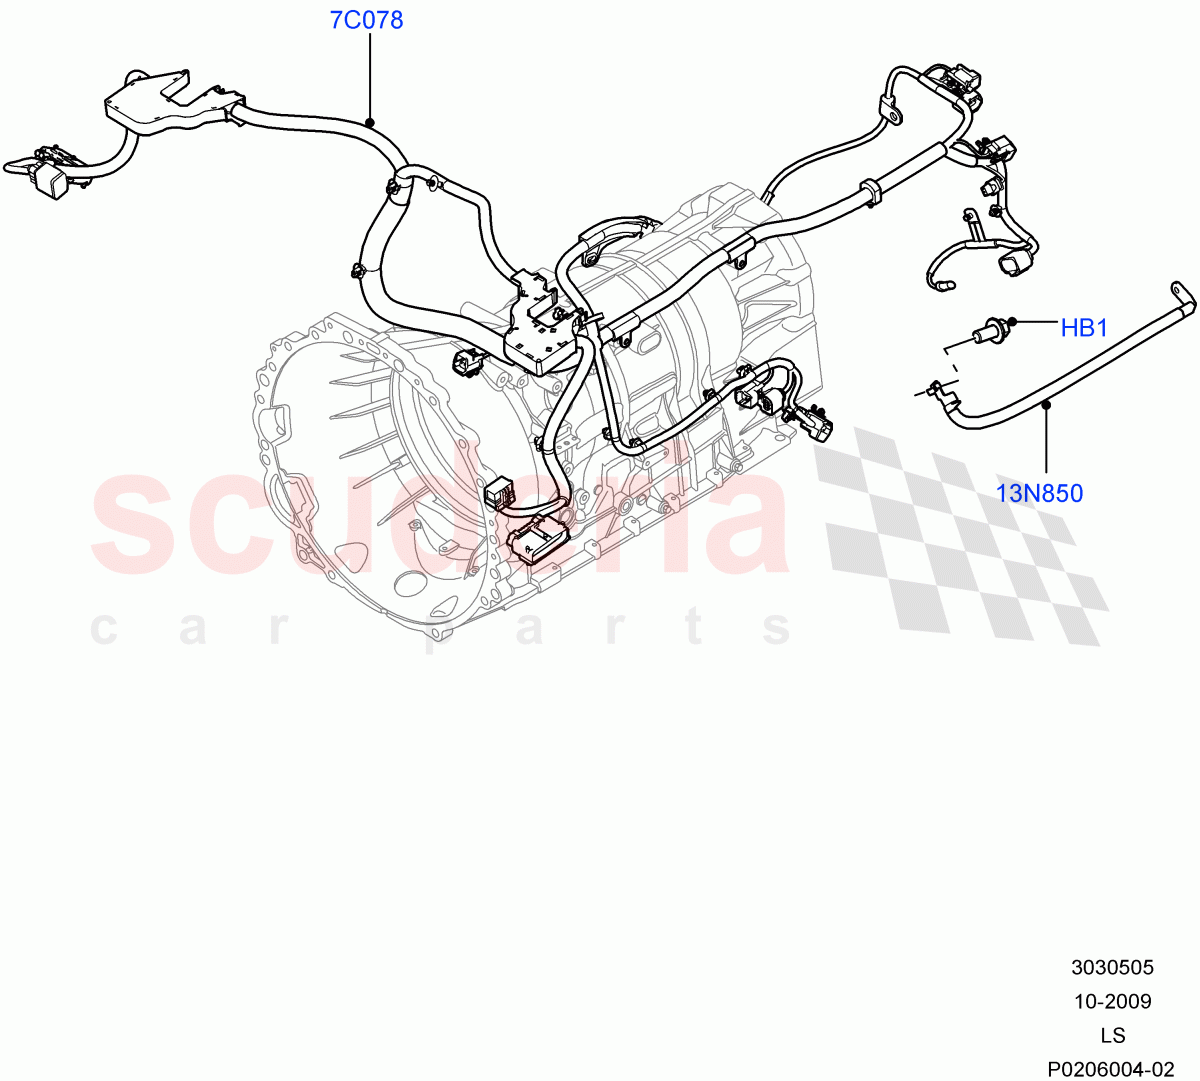 Electrical Wiring - Engine And Dash(Case Assy / Transmission)((V)FROMAA000001) of Land Rover Land Rover Discovery 4 (2010-2016) [3.0 DOHC GDI SC V6 Petrol]